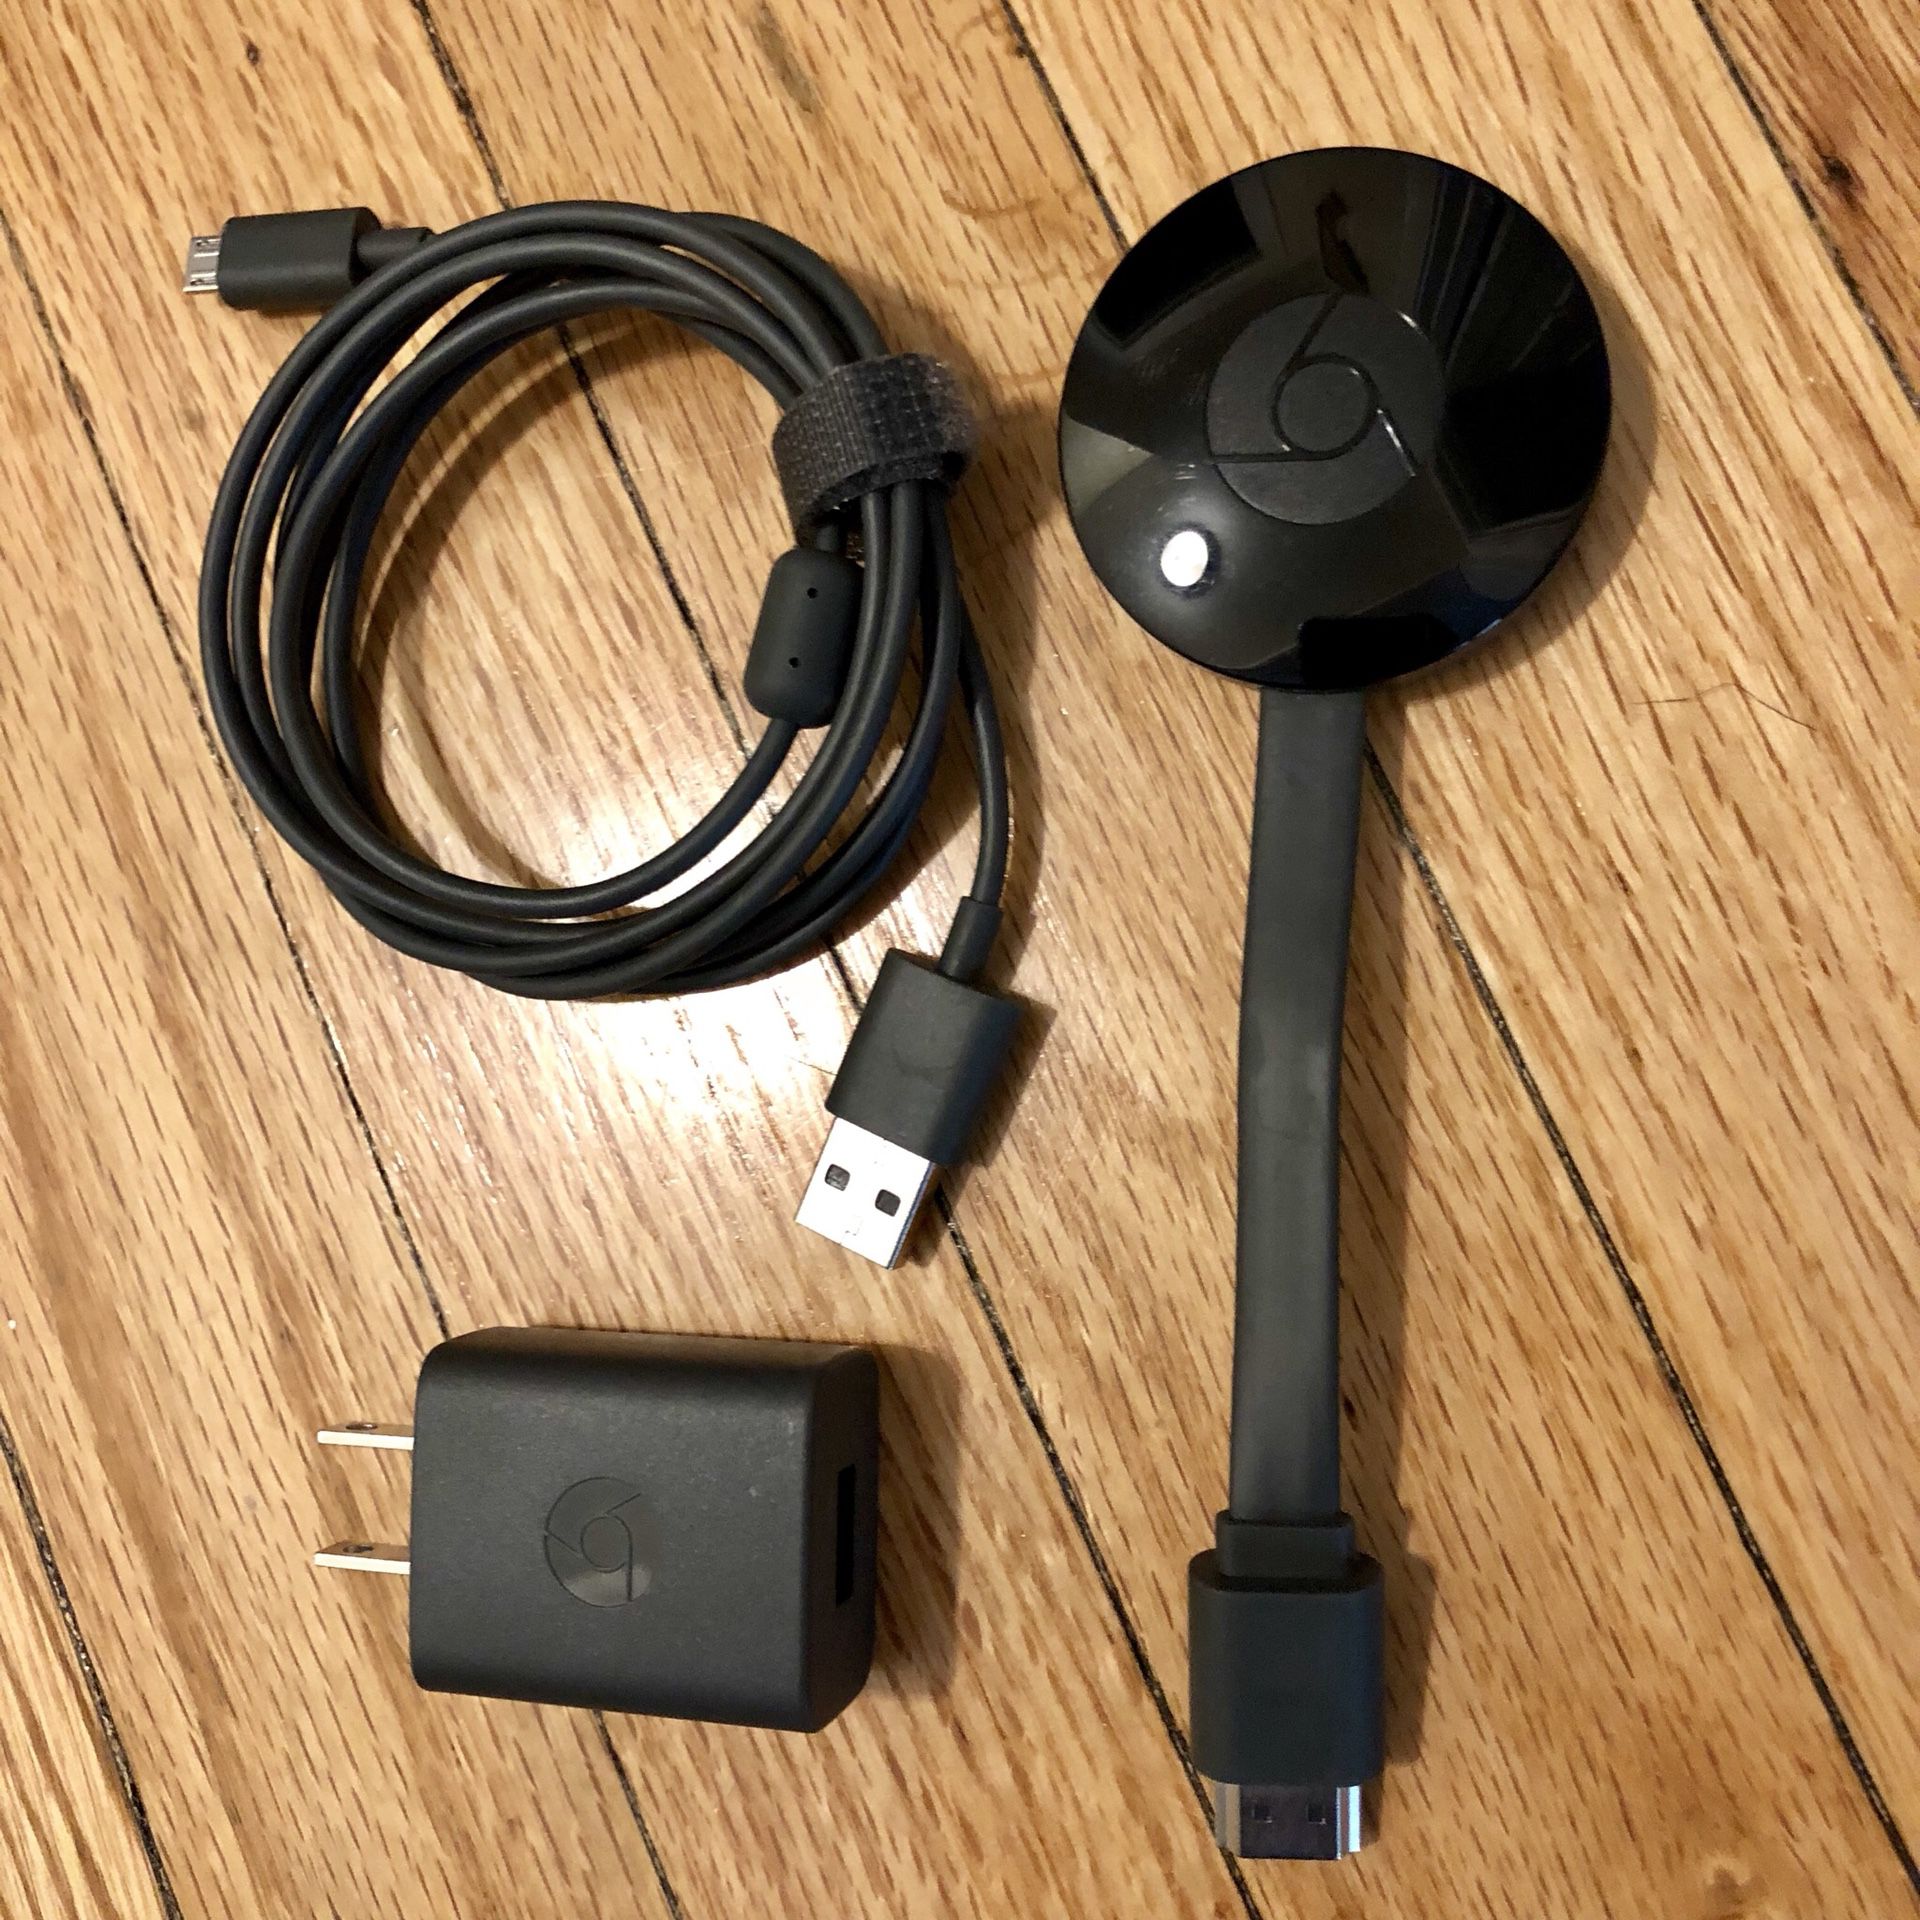 parkere aspekt teenagere Google Chromecast model NC2-6A5 for Sale in Chicago, IL - OfferUp